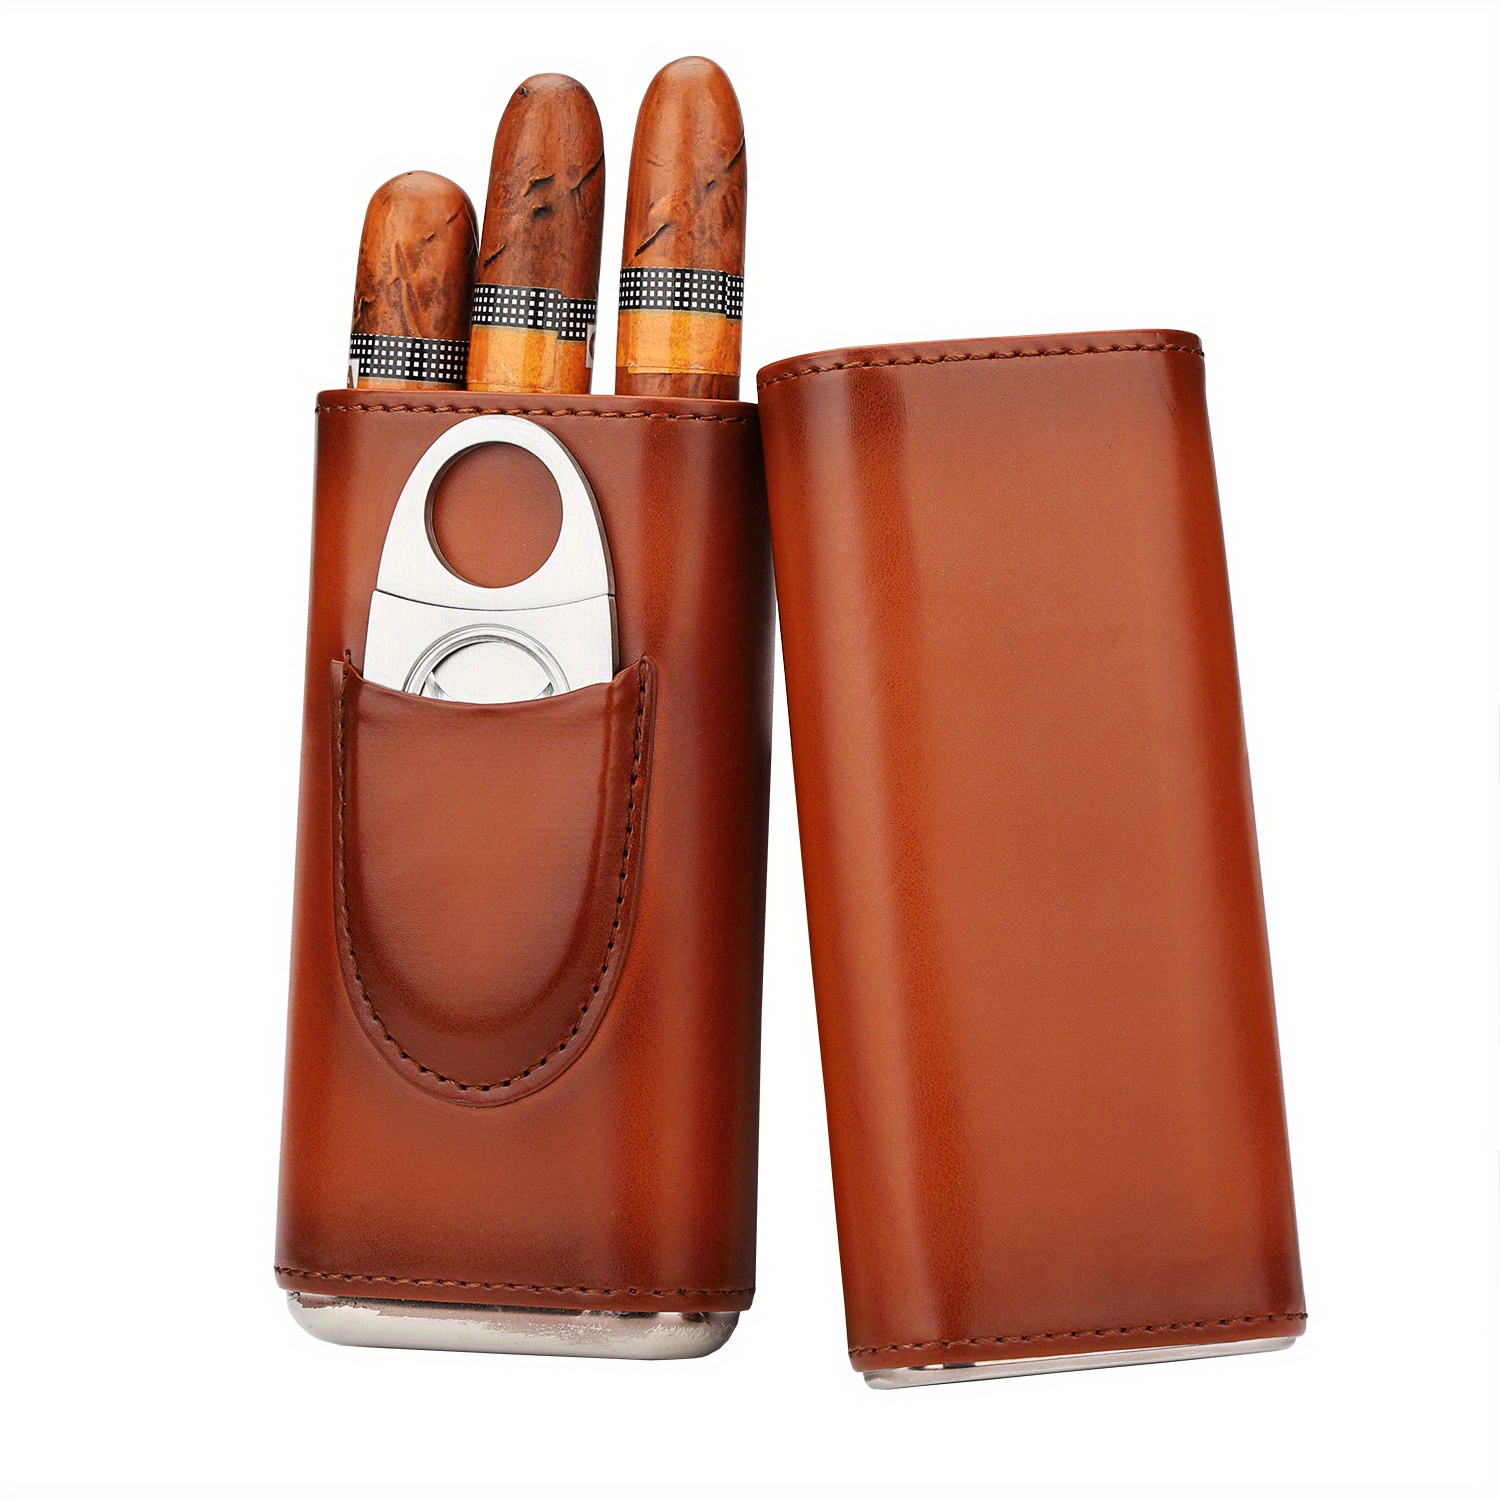 Oyydecor Cigar Case Cigar 3- Finger Carrying Case Set Cedar Wood Lined  Leather, Cigar Humidor with Silver Stainless Steel Cutter (Brown)